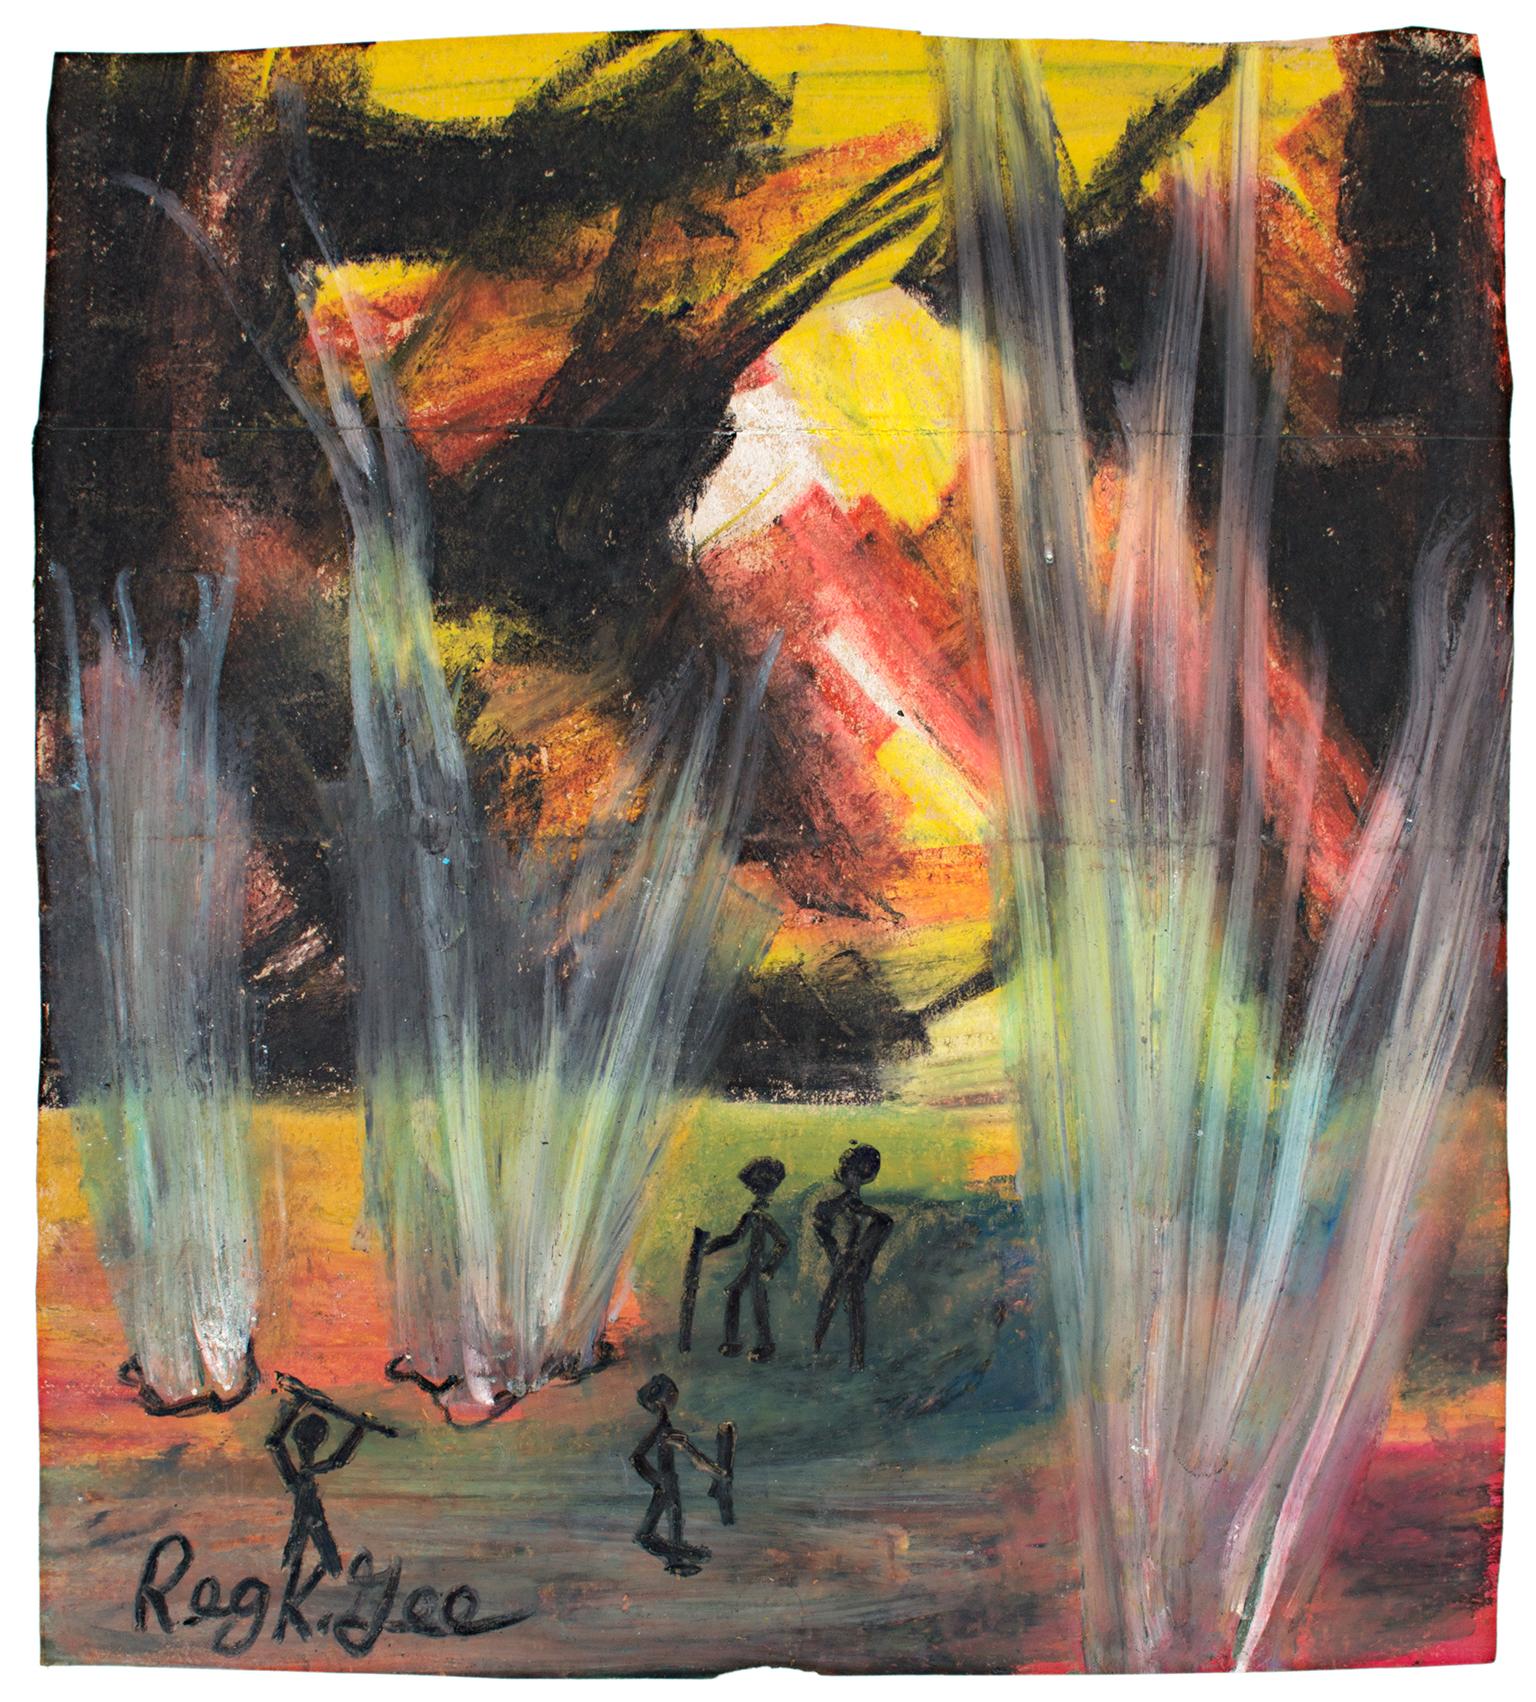 "The Light from Beneath" is an original oil pastel on a grocery bag by Reginald K. Gee. The artist signed the piece lower left. This piece features multiple simplified figures in a dark landscape with light streaming from the ground. The dominant